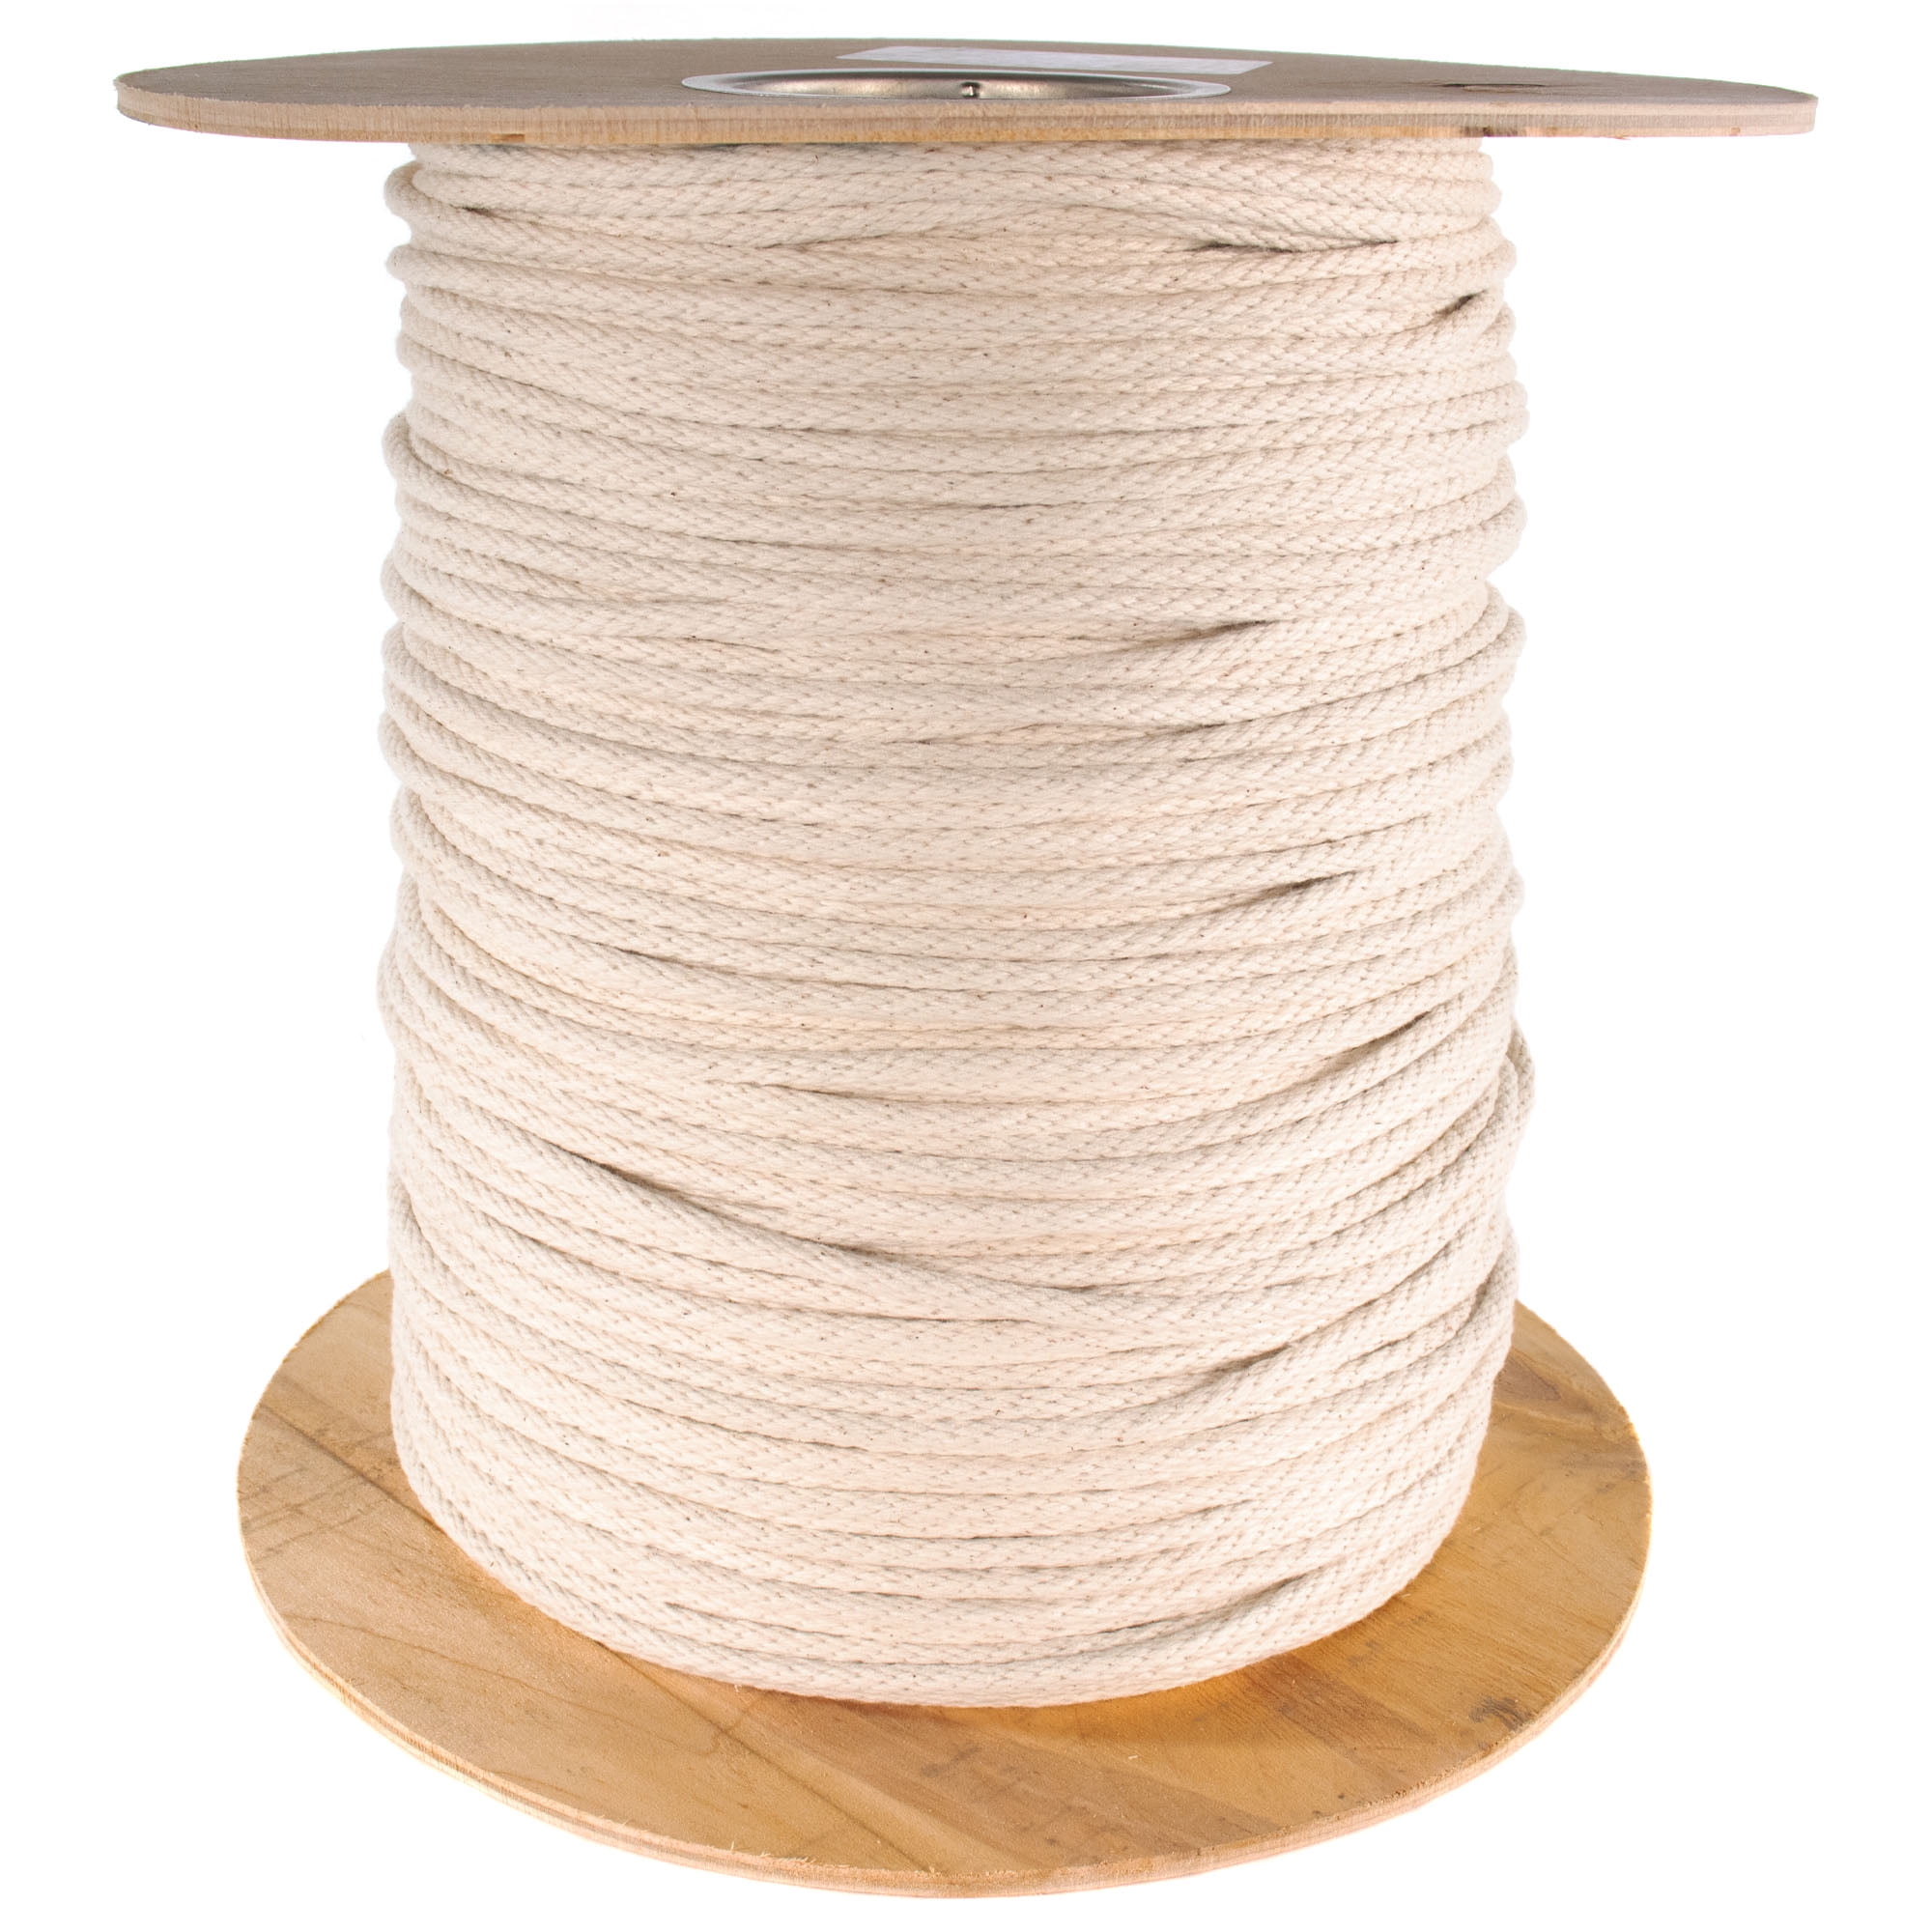 Cotton Rope Line Cord Tie Sash Washing Clothes Pulley Macrame 8 Strand 4-10mm 